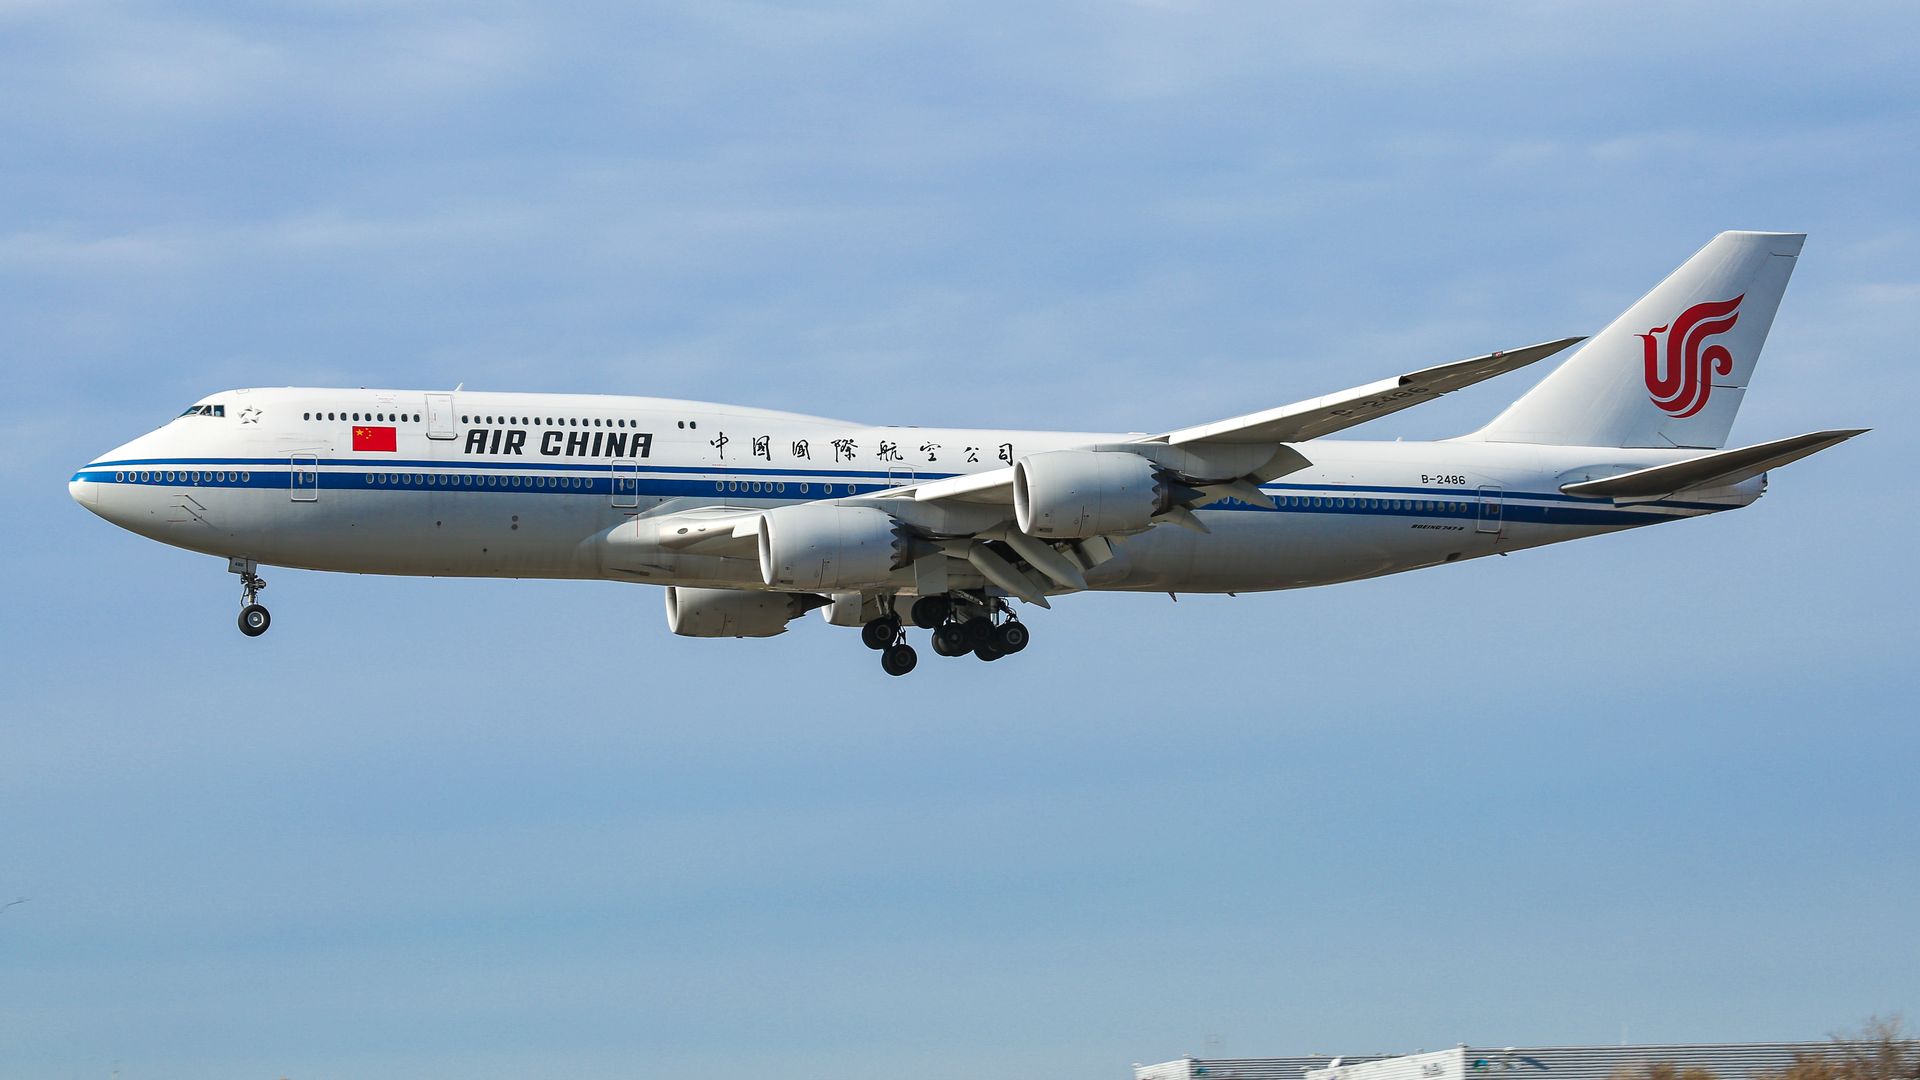 An Air China aircraft landing in New York City in January 2020.